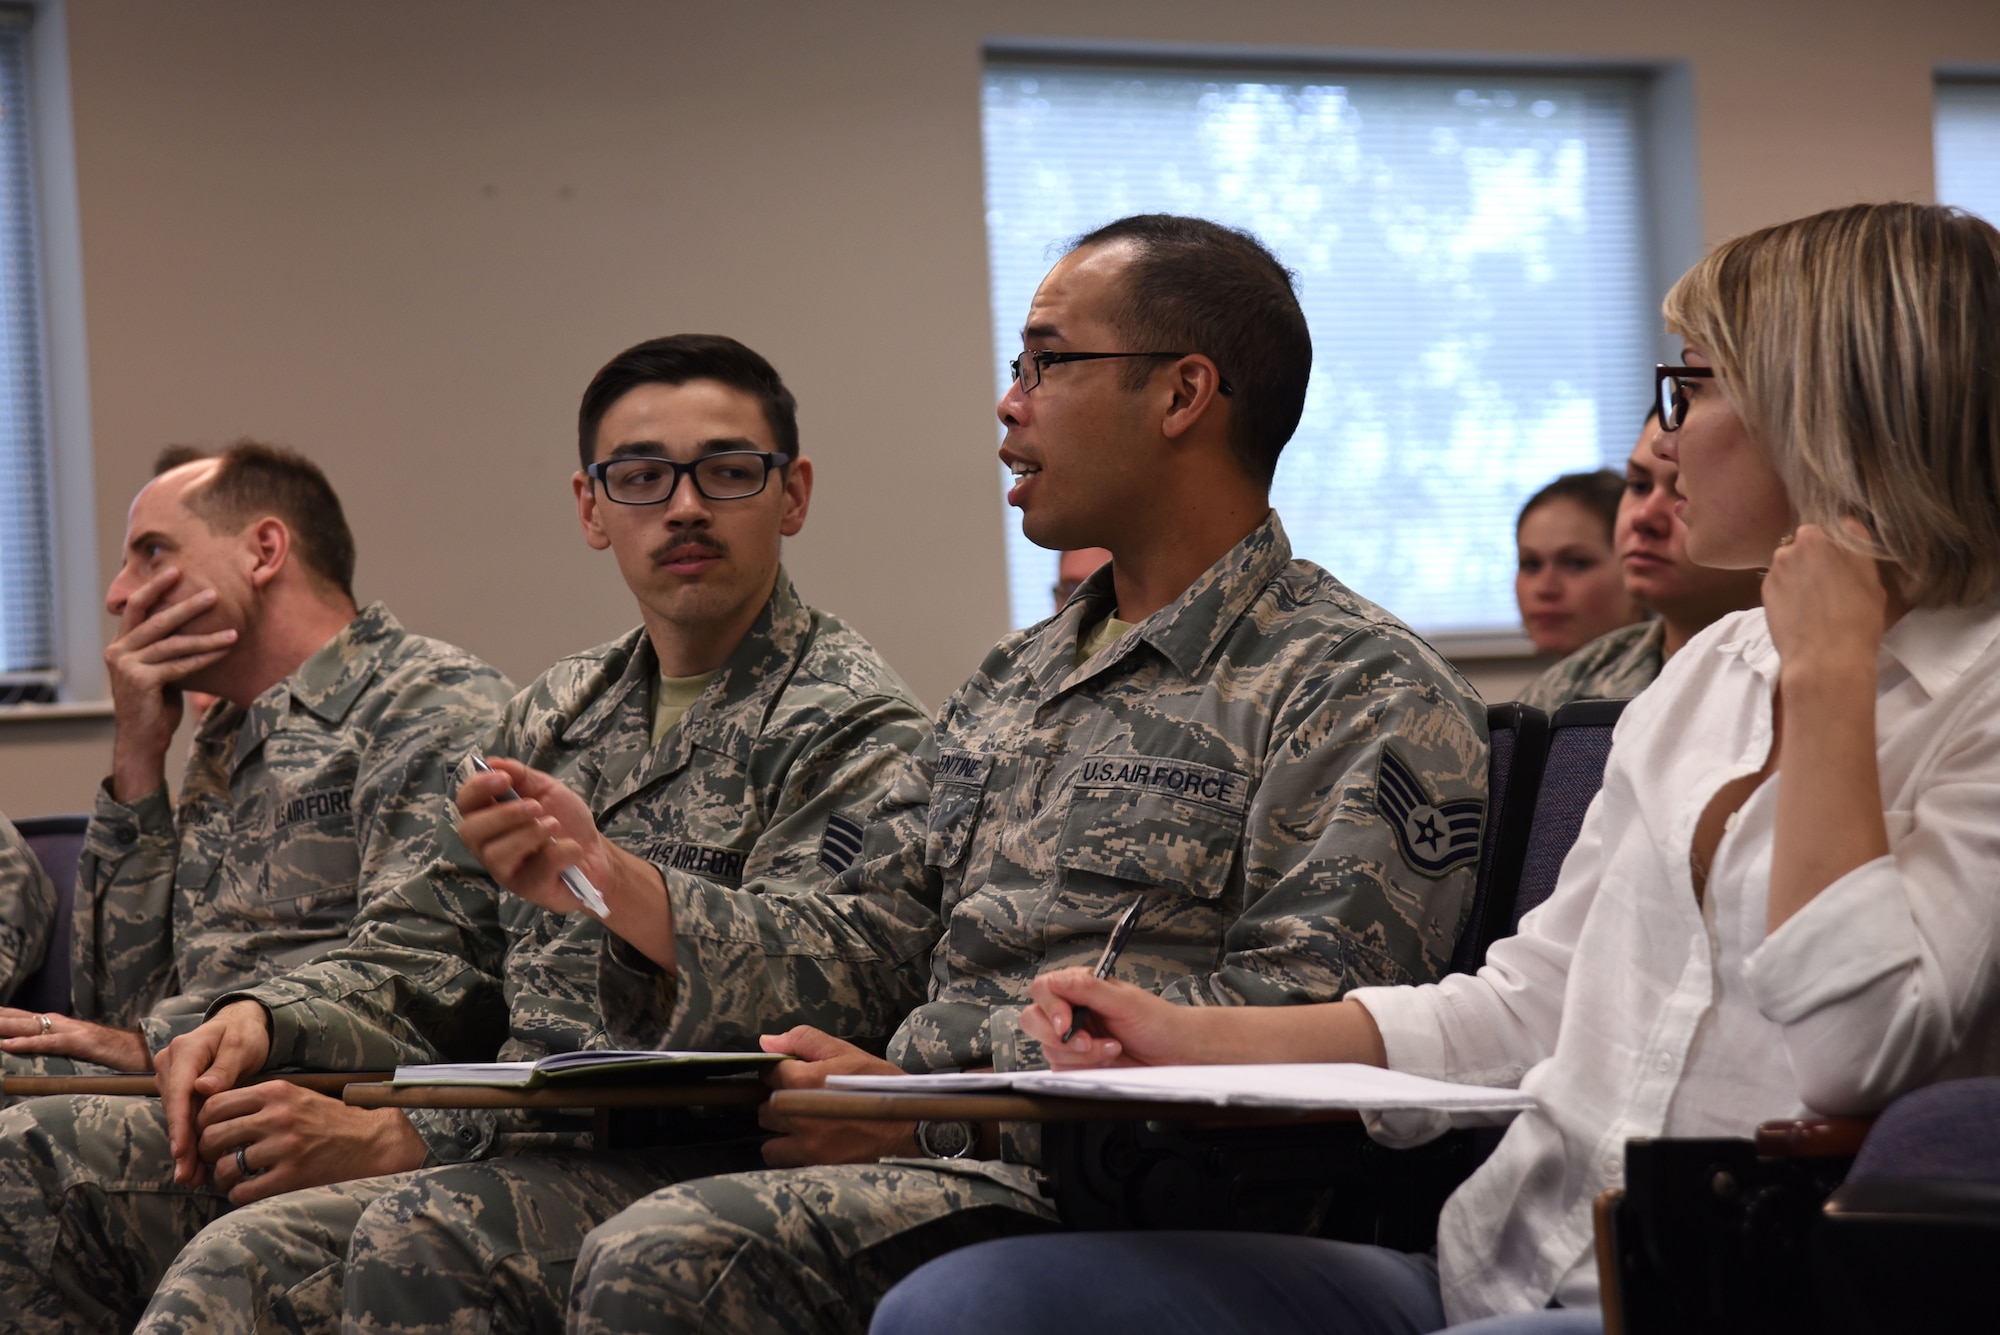 A U.S. Airman asks a question during a Headquarters Air Force Office of Special Investigations (AFOSI) recruiting team visit to the Spratt Education Center at Shaw Air Force Base, S.C., July 30, 2018.